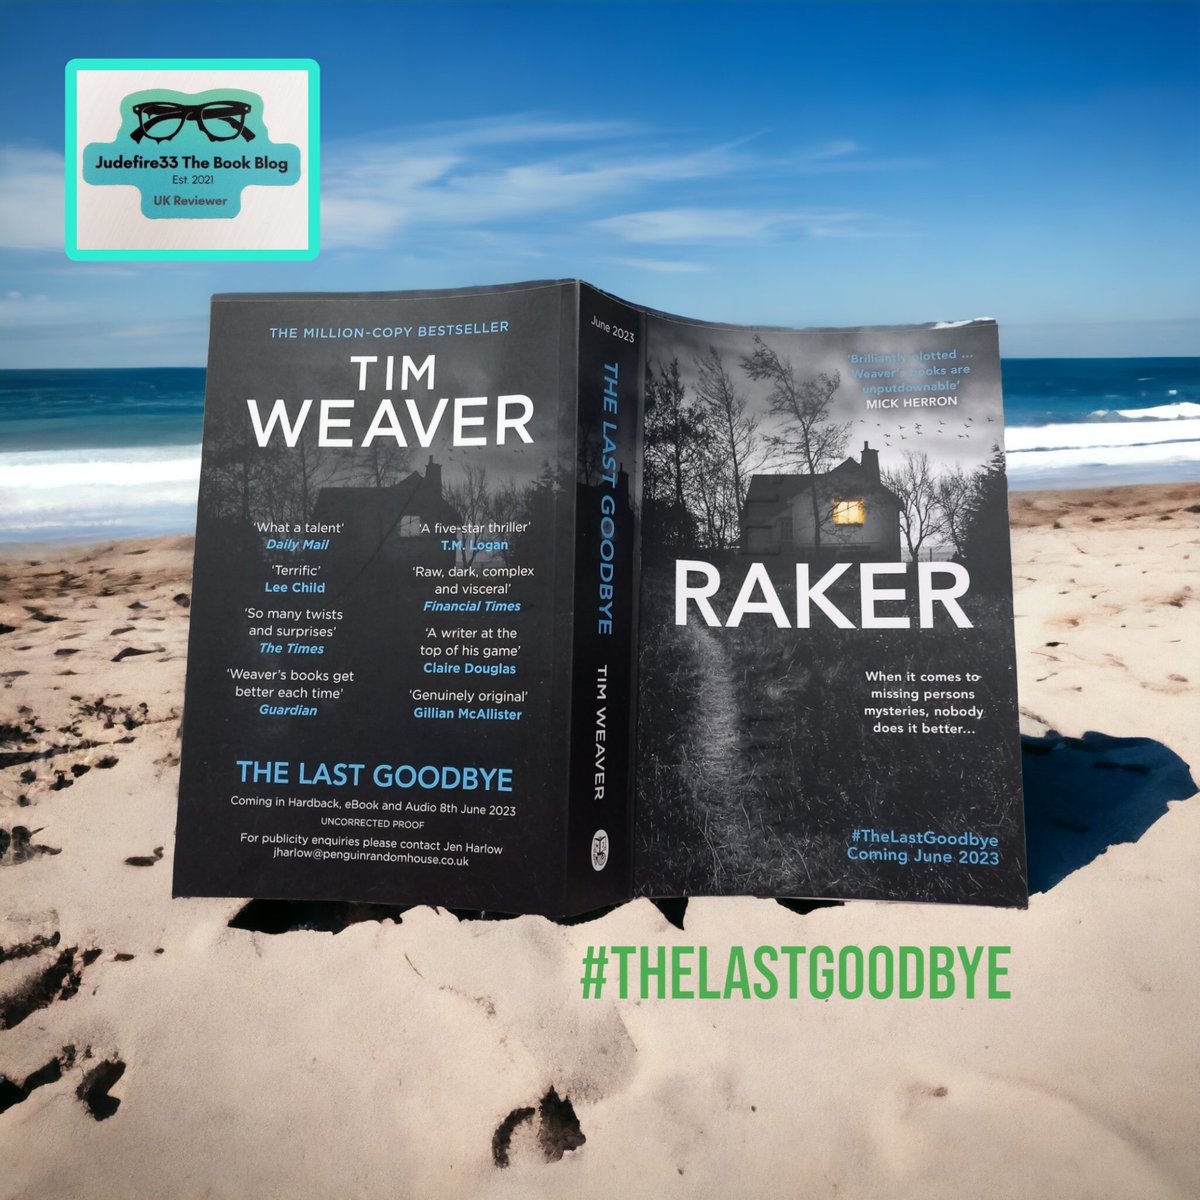 Phew just finished #TheLastGoodbye by @TimWeaverBooks  @MichaelJBooks..#DavidTaker #Book12 ... absolutely gripping and utterly engrossing!! Full review to follow but 5 ⭐️⭐️⭐️⭐️⭐️ read!!